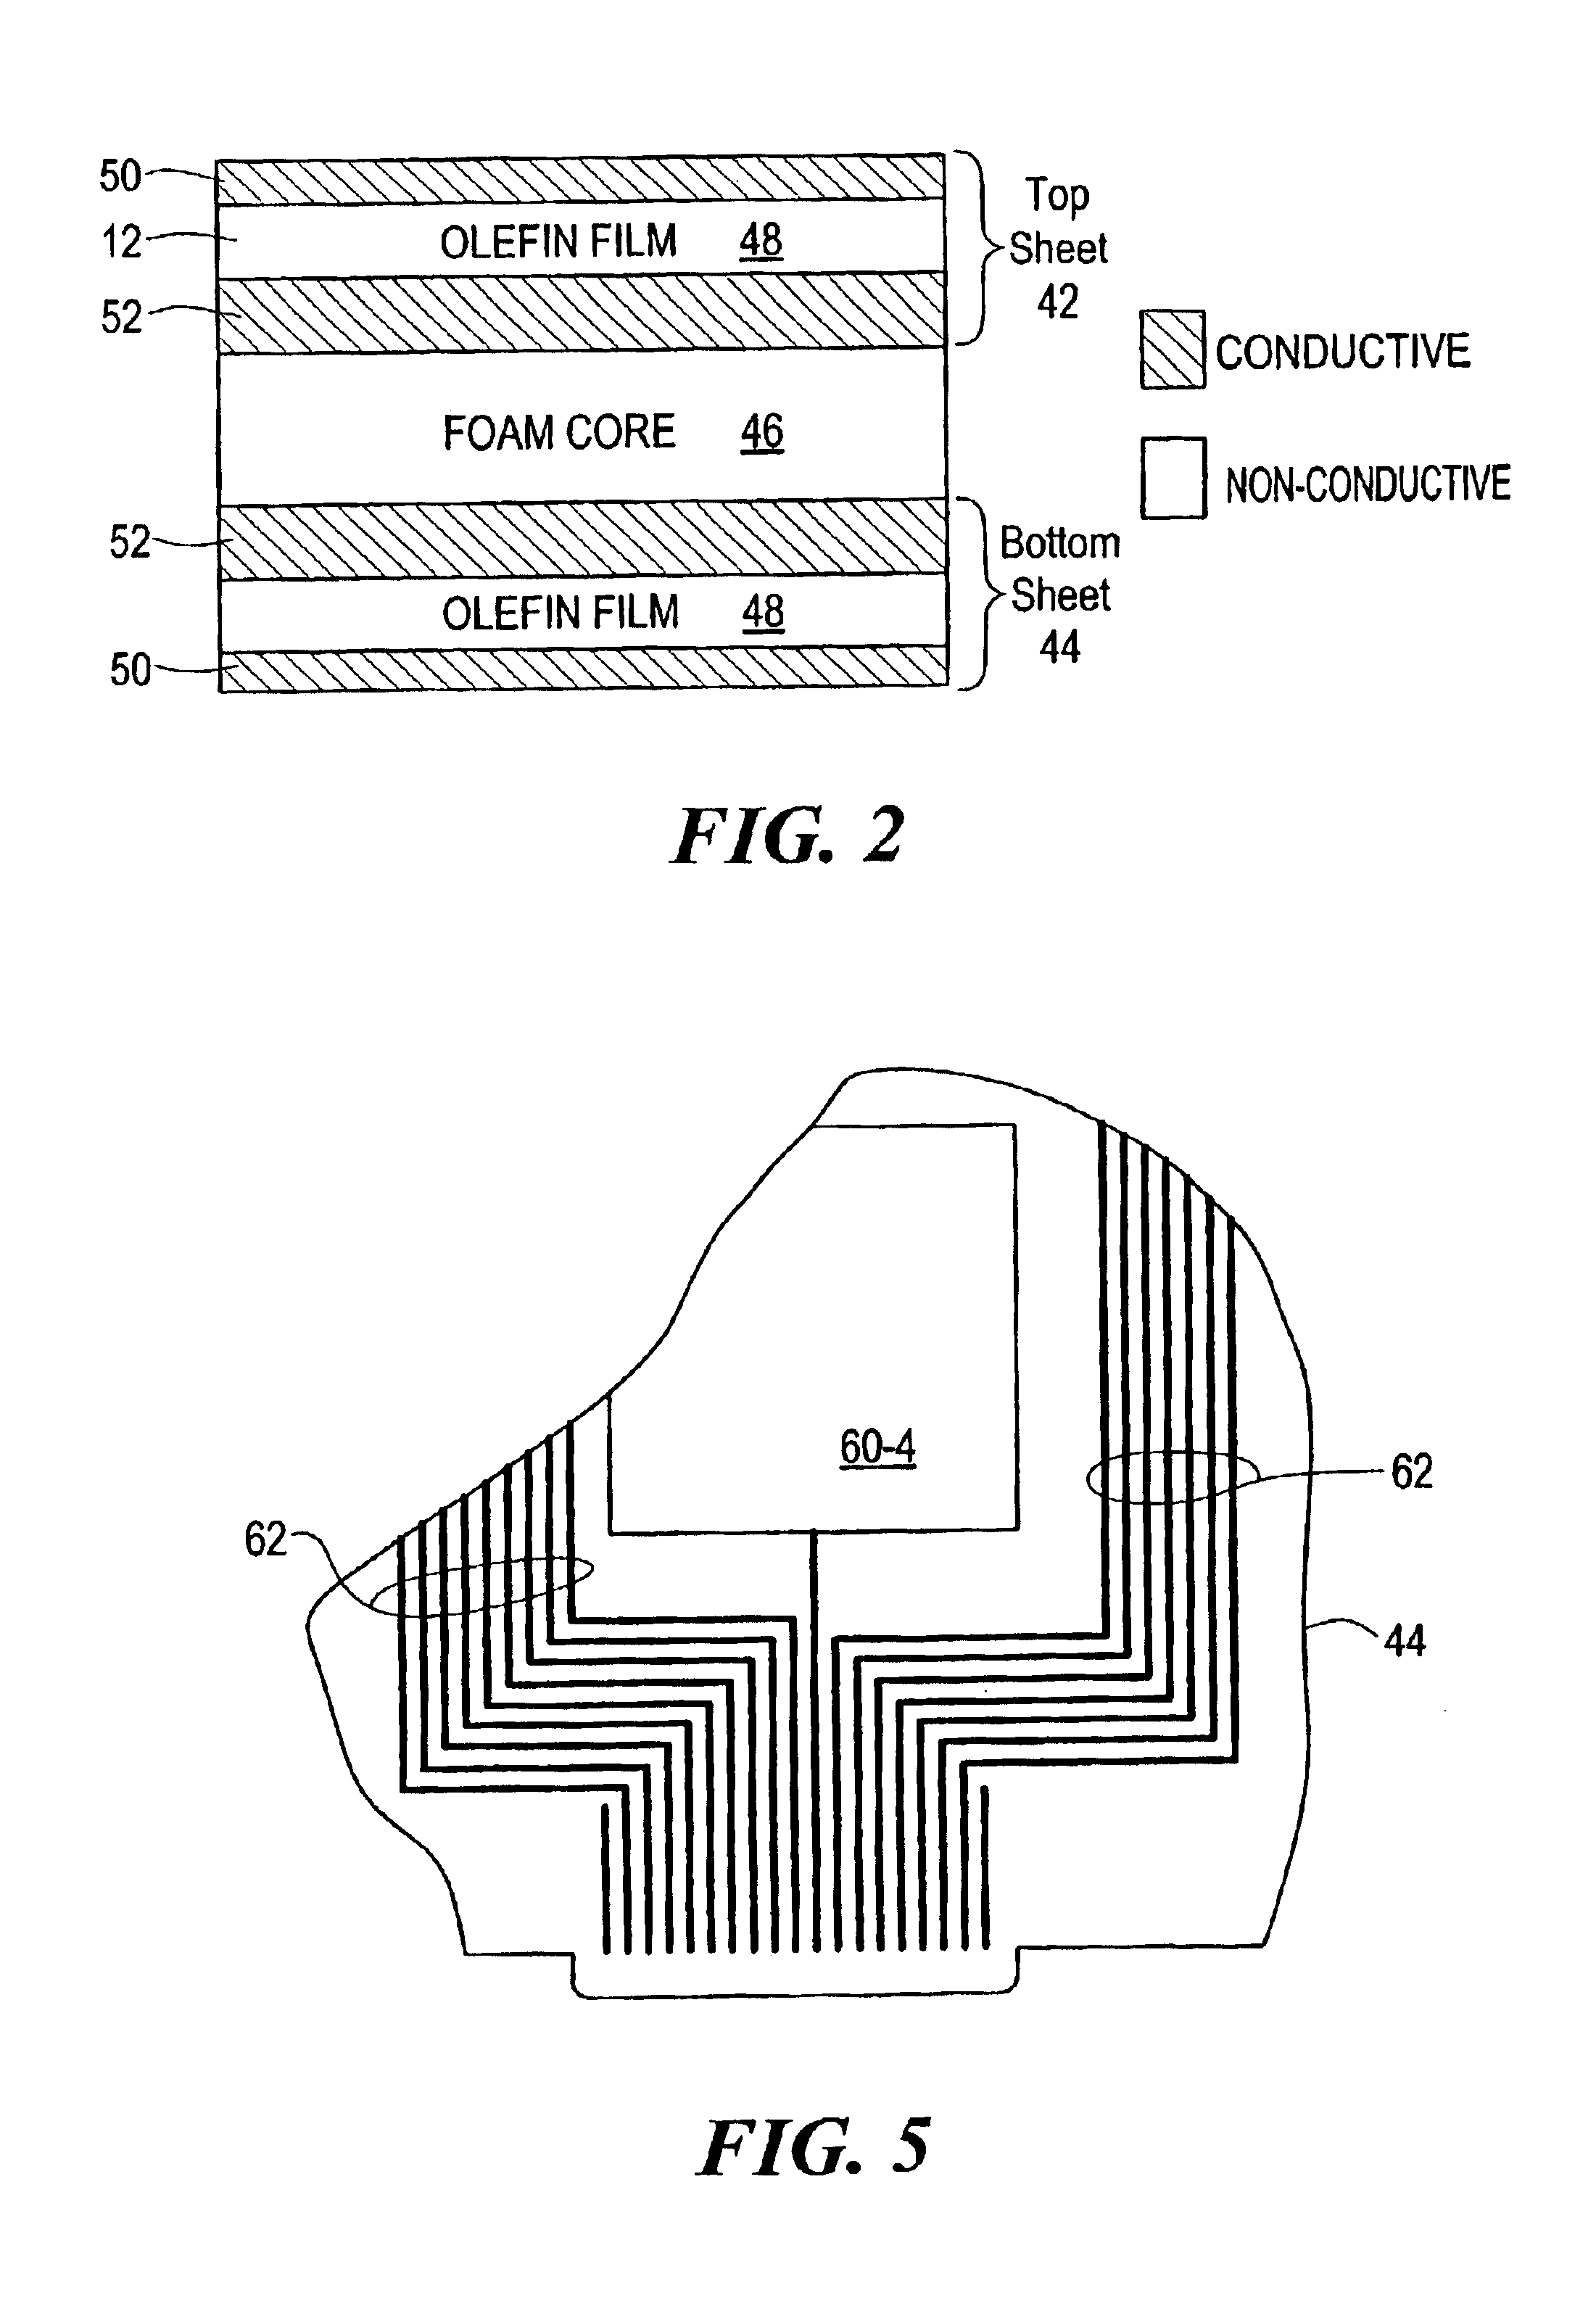 Patient monitoring system employing array of force sensors on a bedsheet or similar substrate